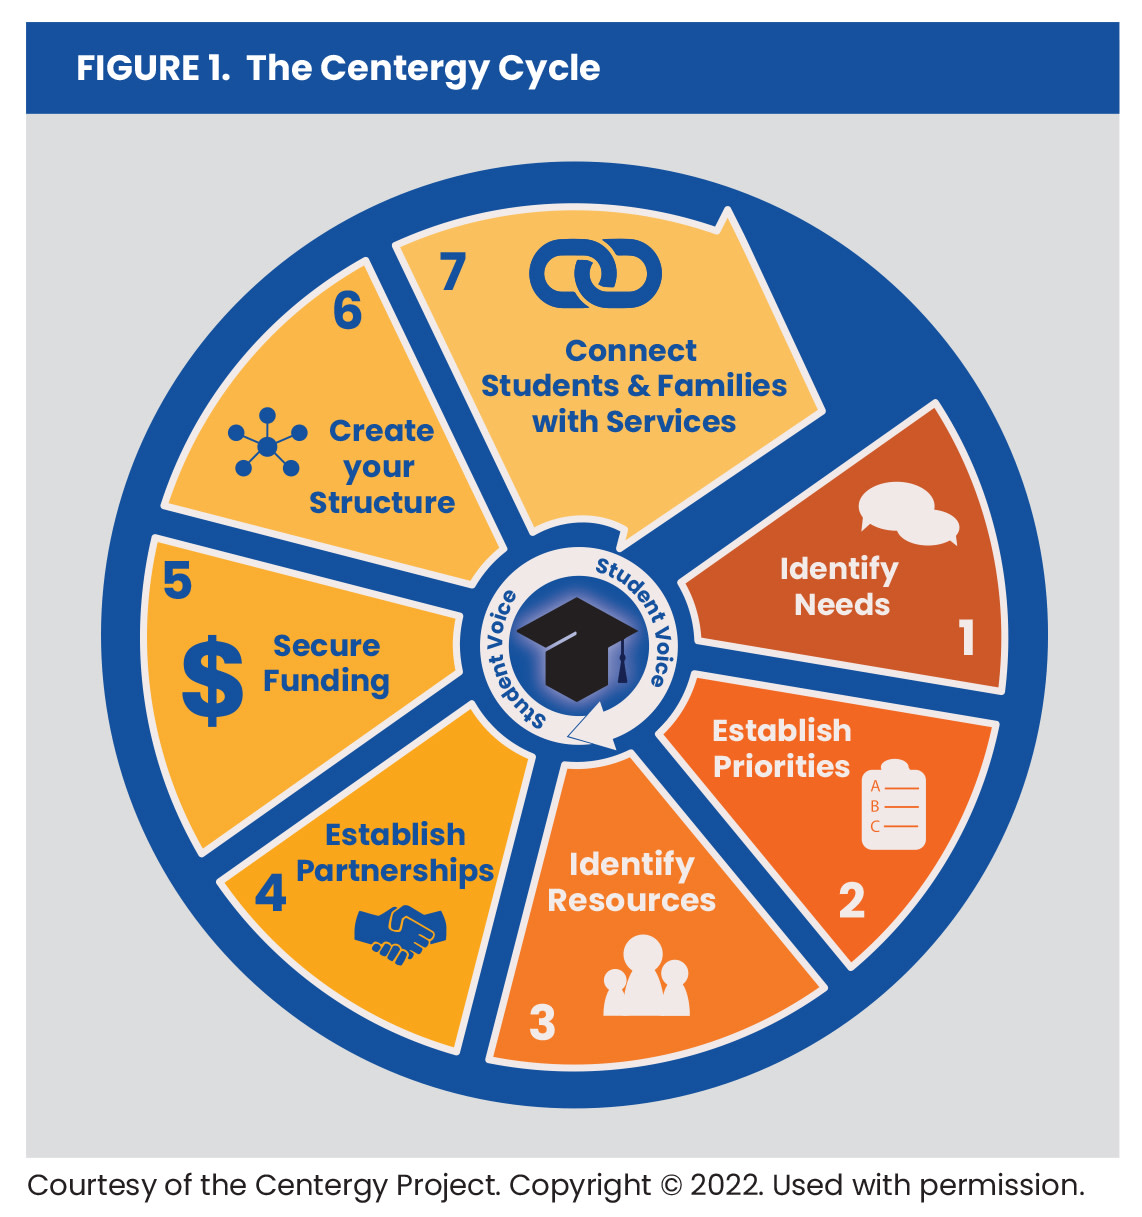 Figure 1. The Centergy Cycle